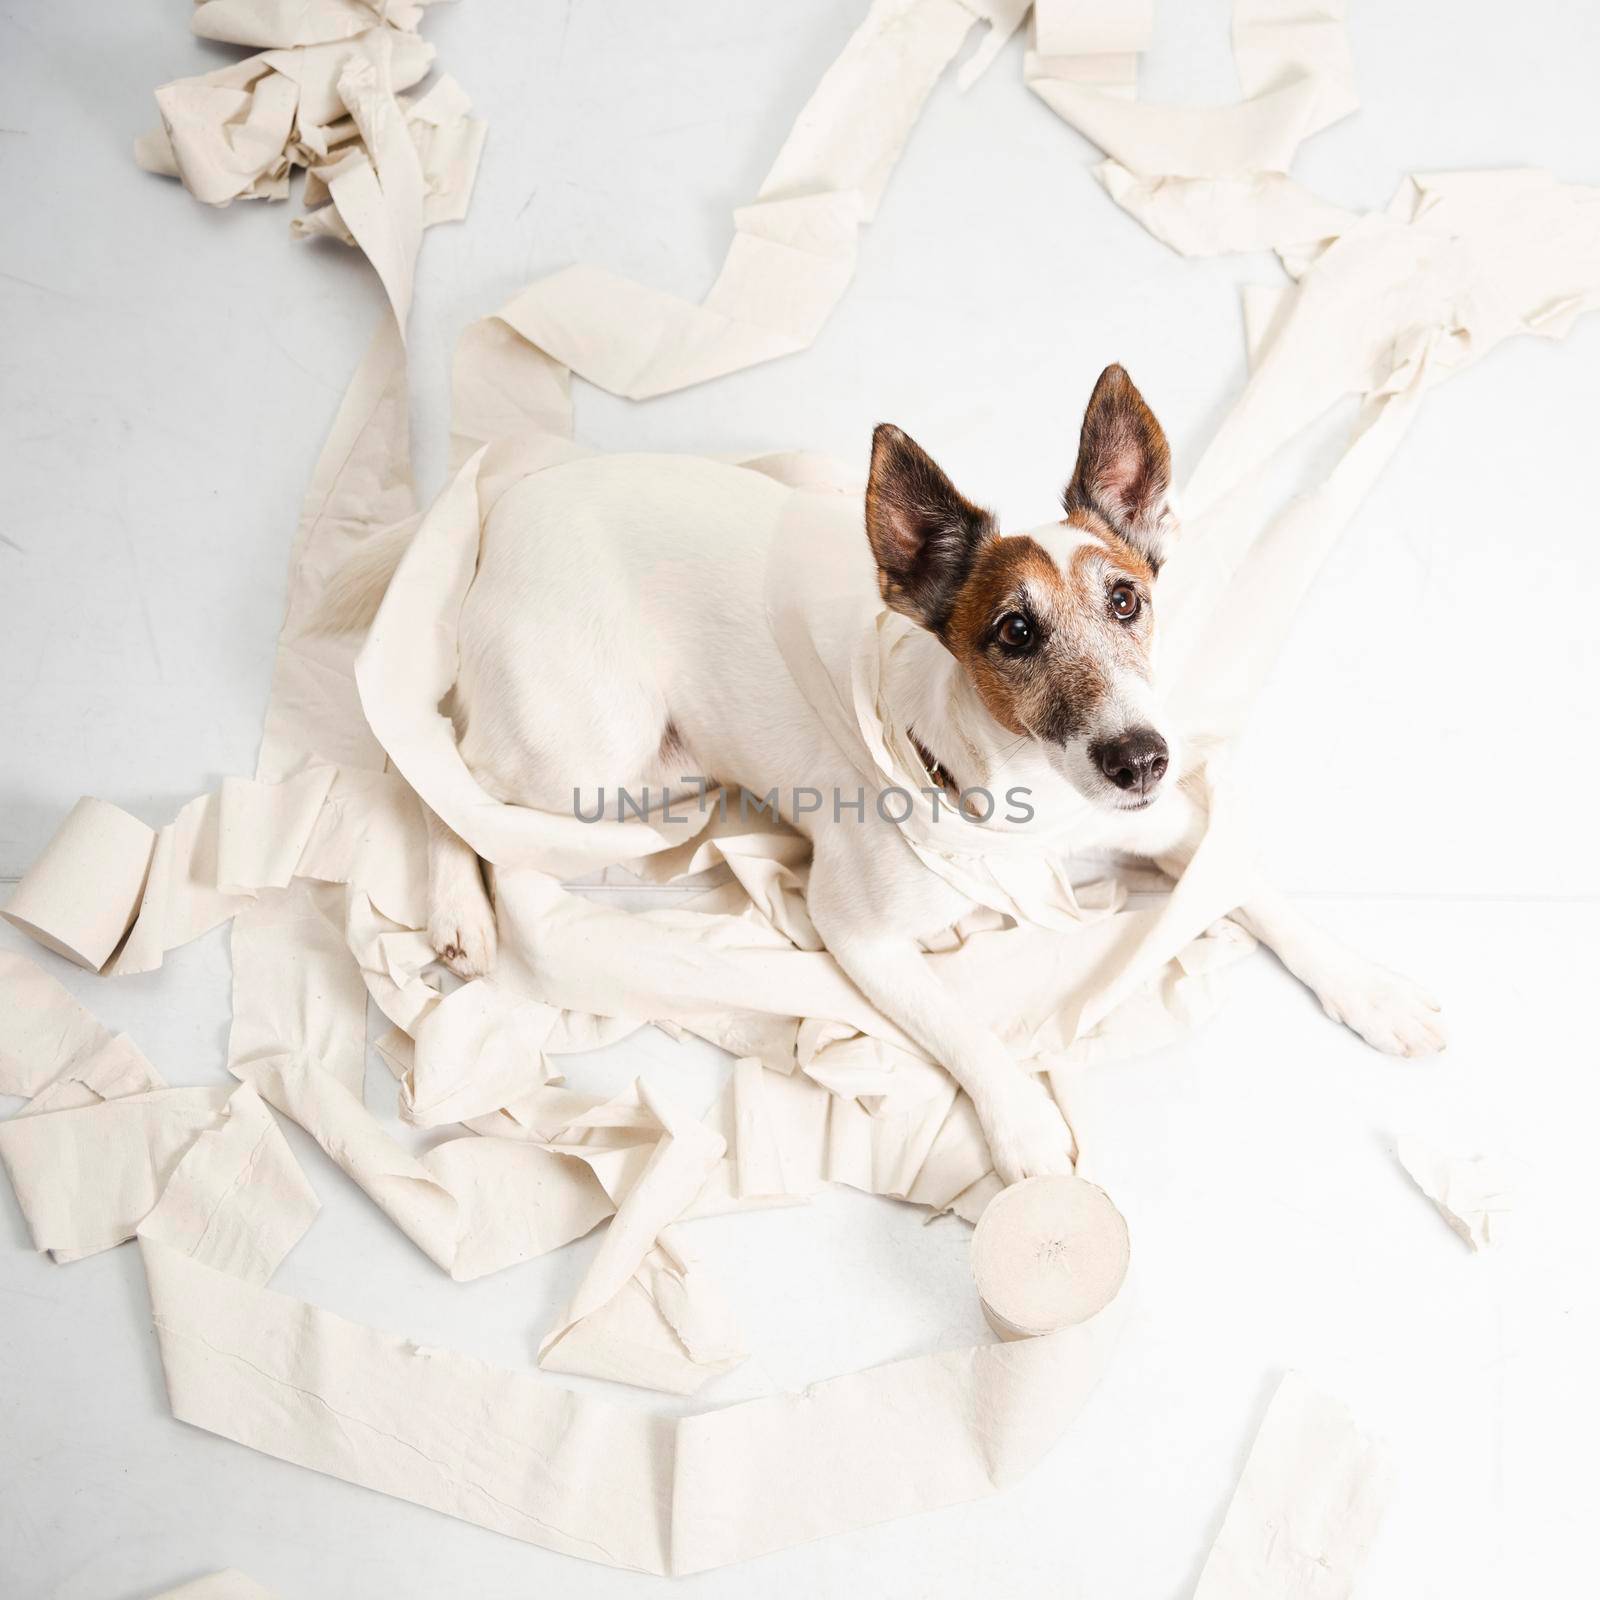 cute dog making huge mess with rolling paper. High quality photo by Zahard